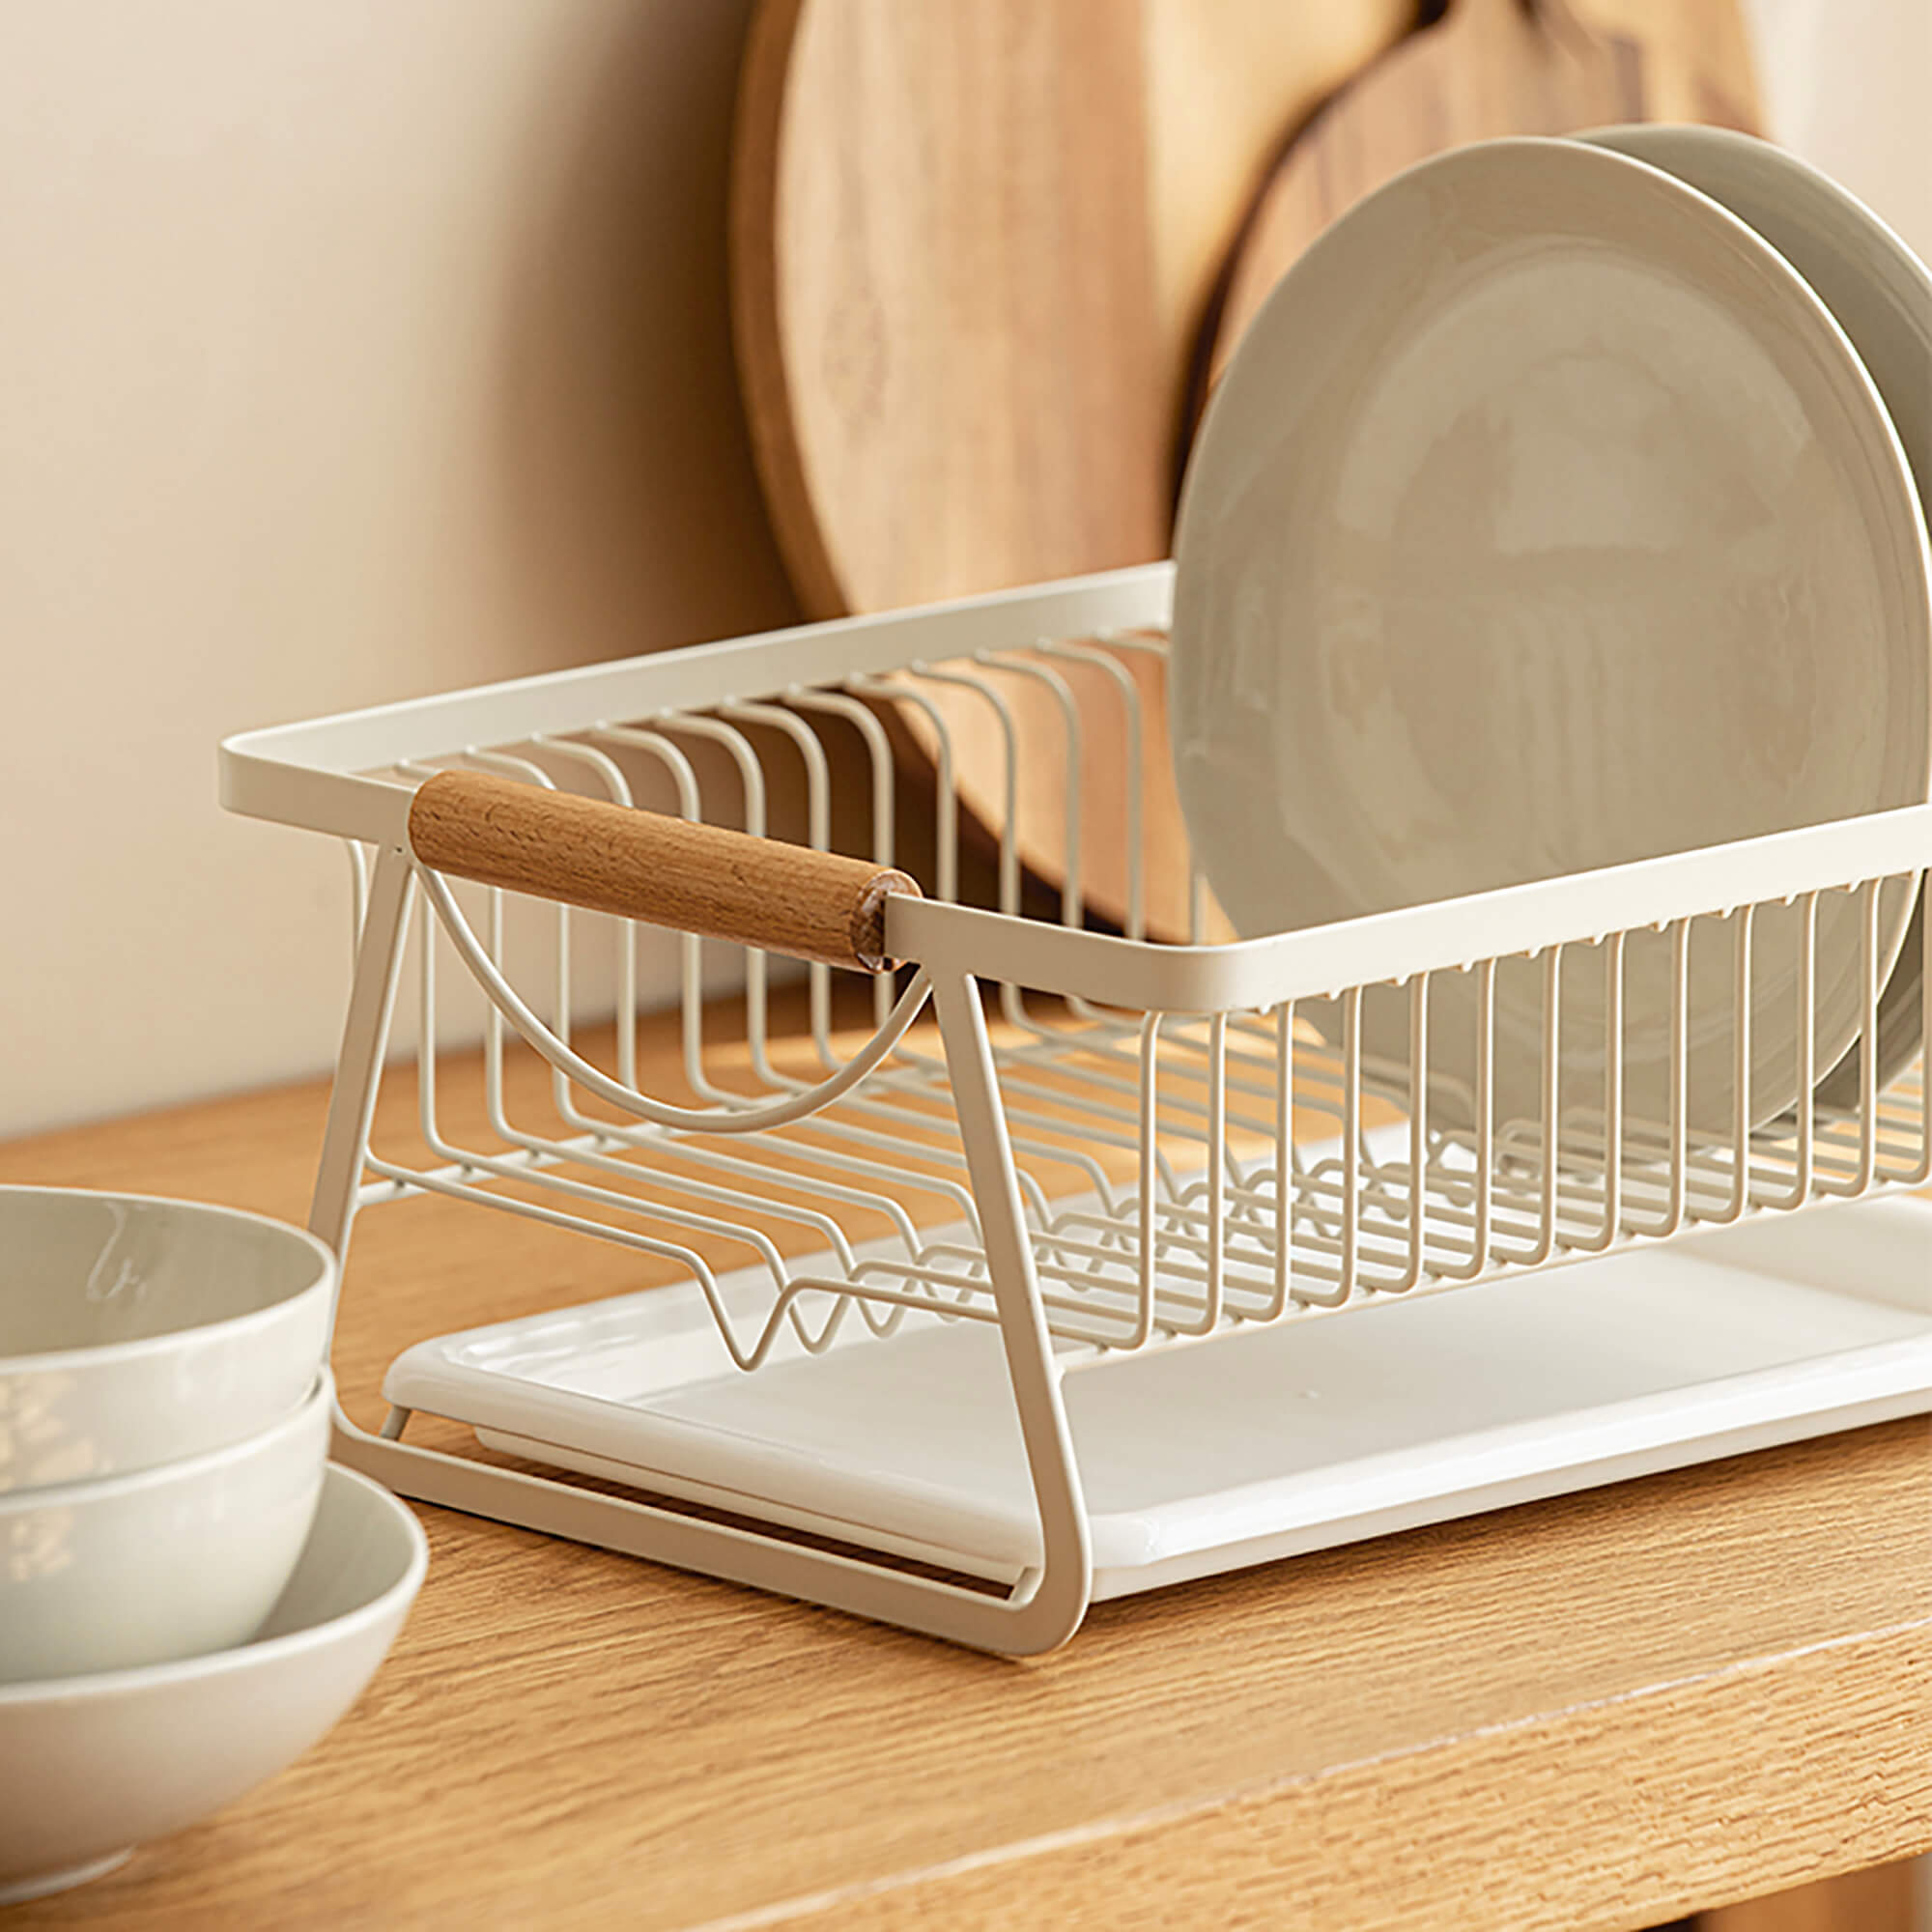 Japanese Style Simple Metal Dish Organizer Rack, Plate Drainer For